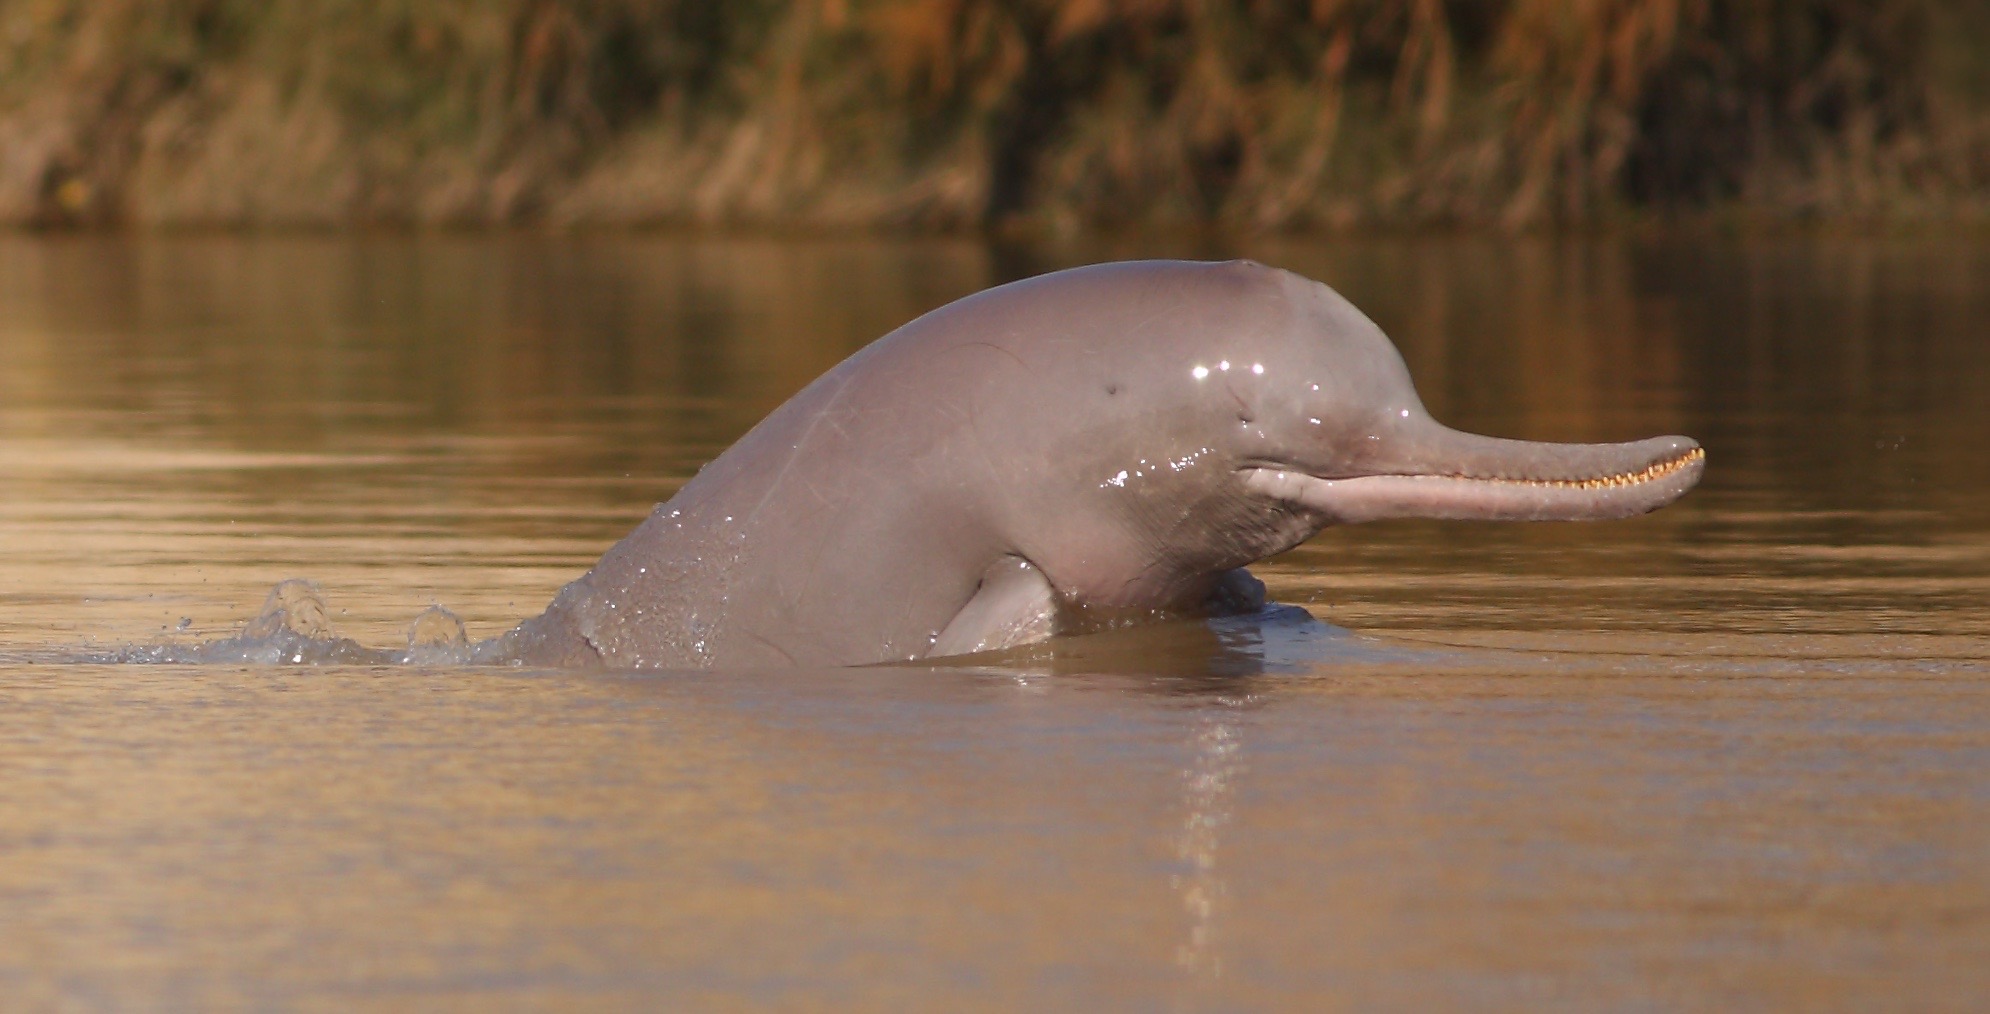 Why should we save the Indus River Dolphin?